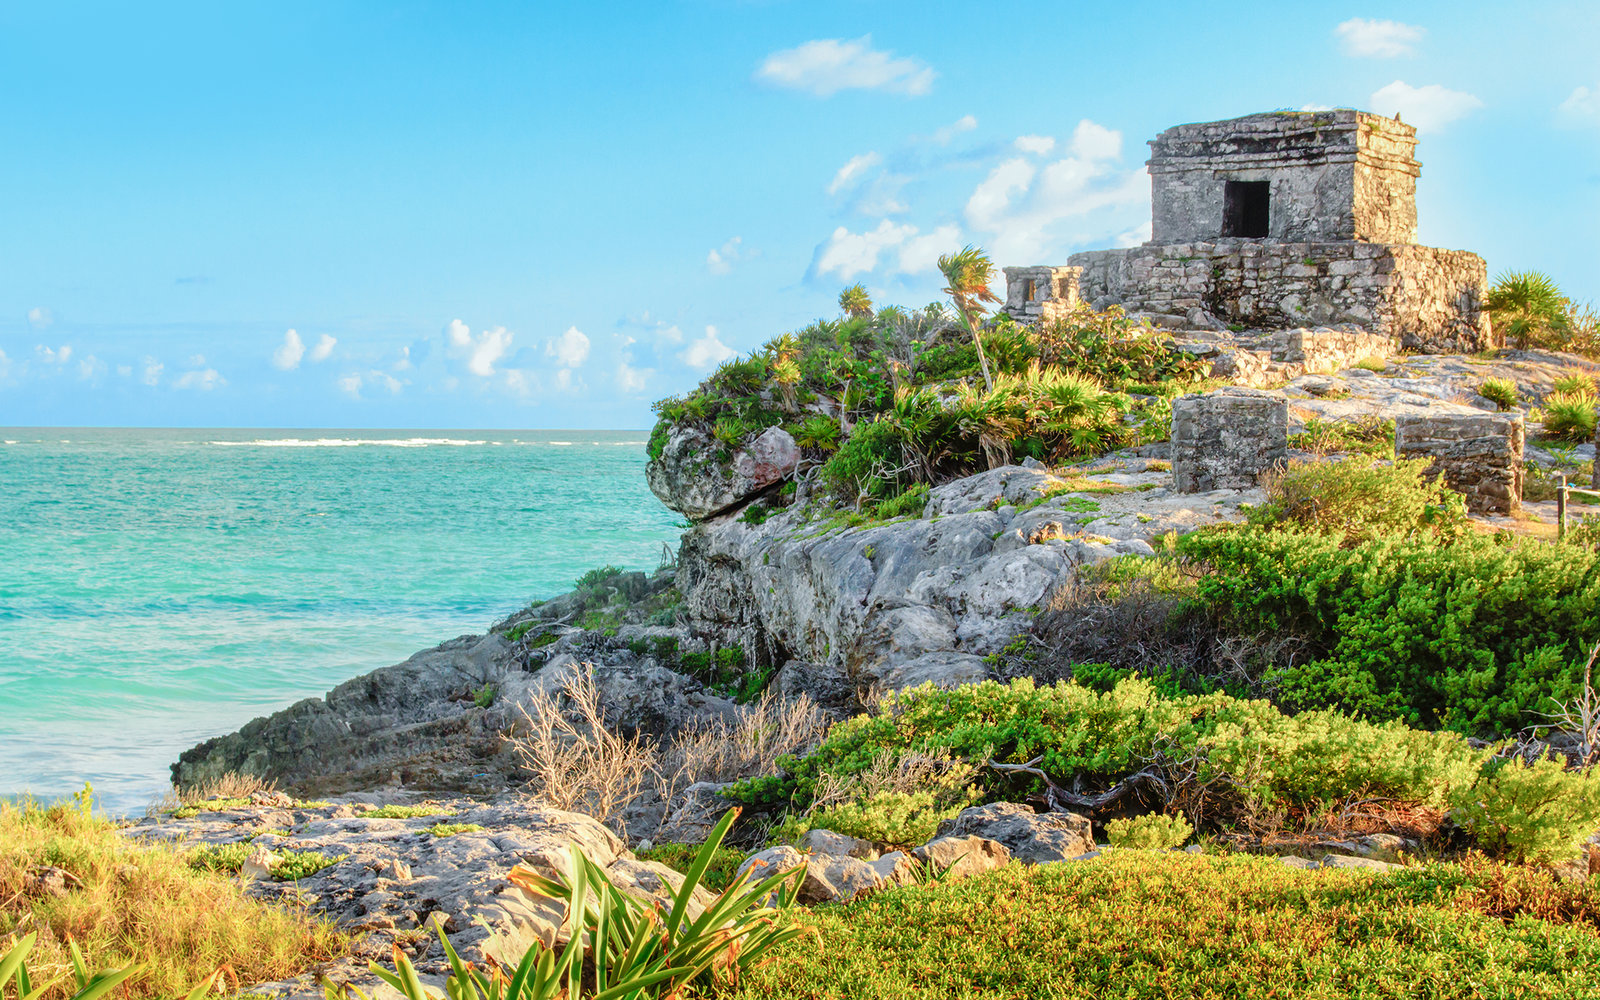 Top 5 Archeological Sites to Visit in the Yucatan Peninsula